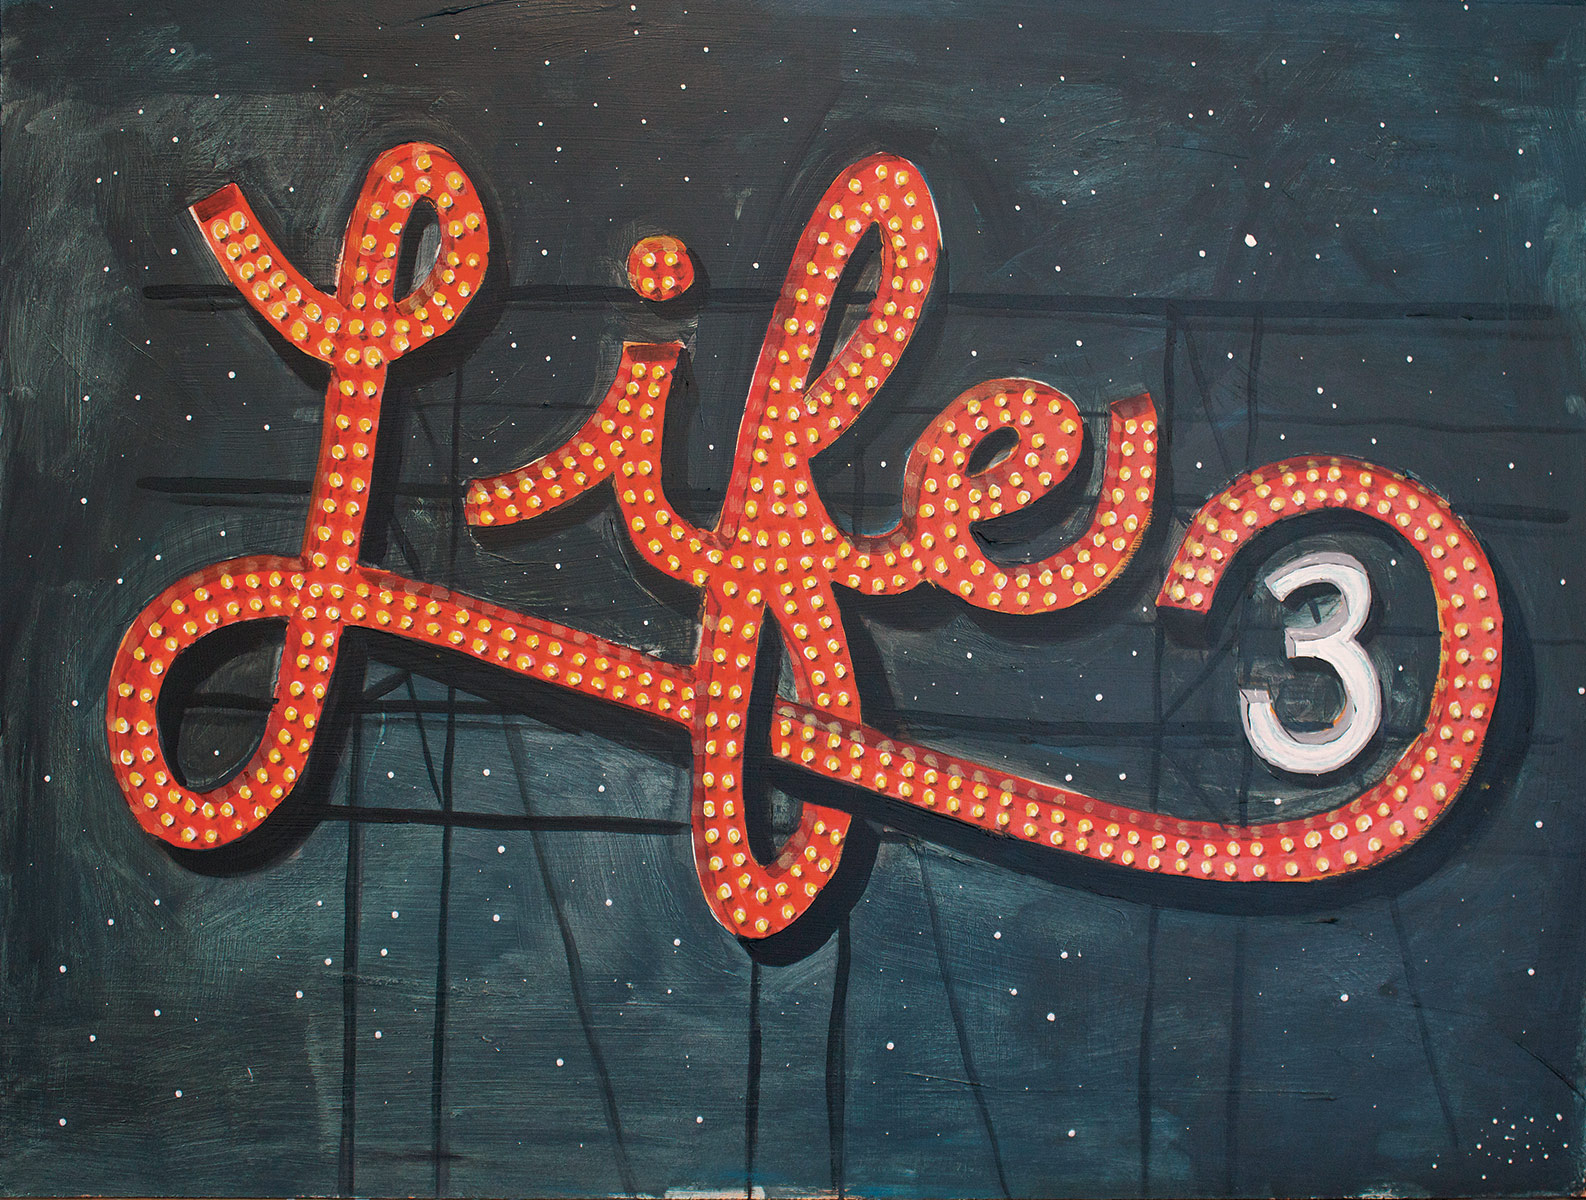 A neon sign that says life 3.